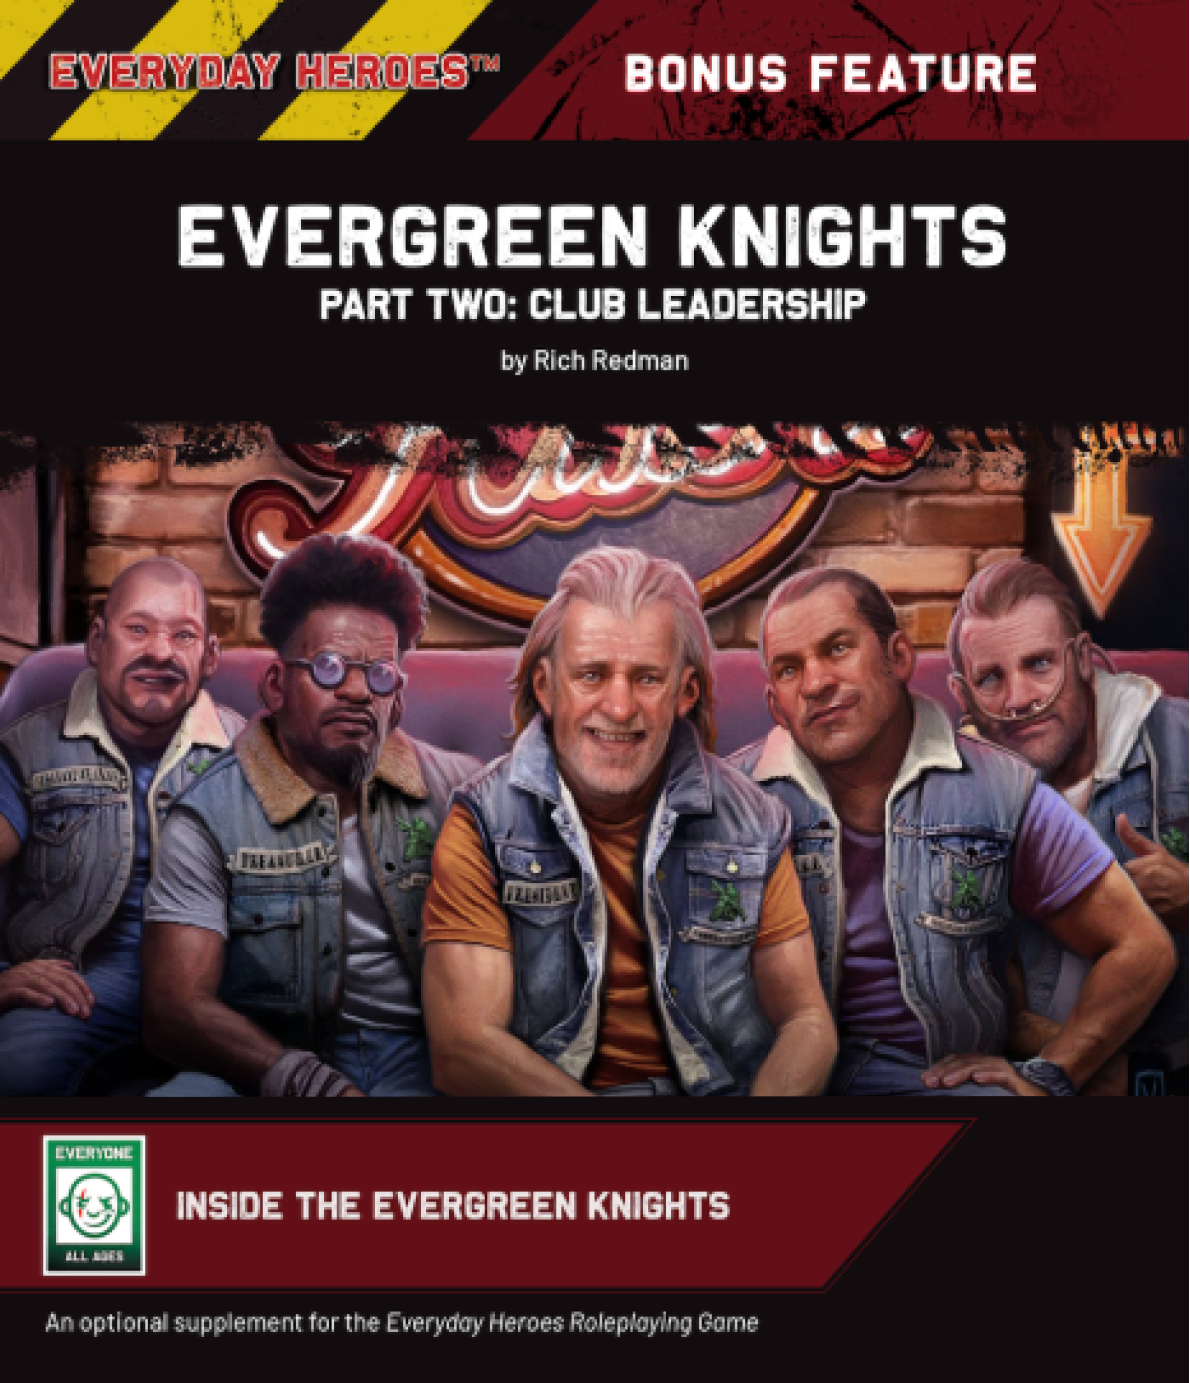 Evergreen Knights Part Two: Club Leadership